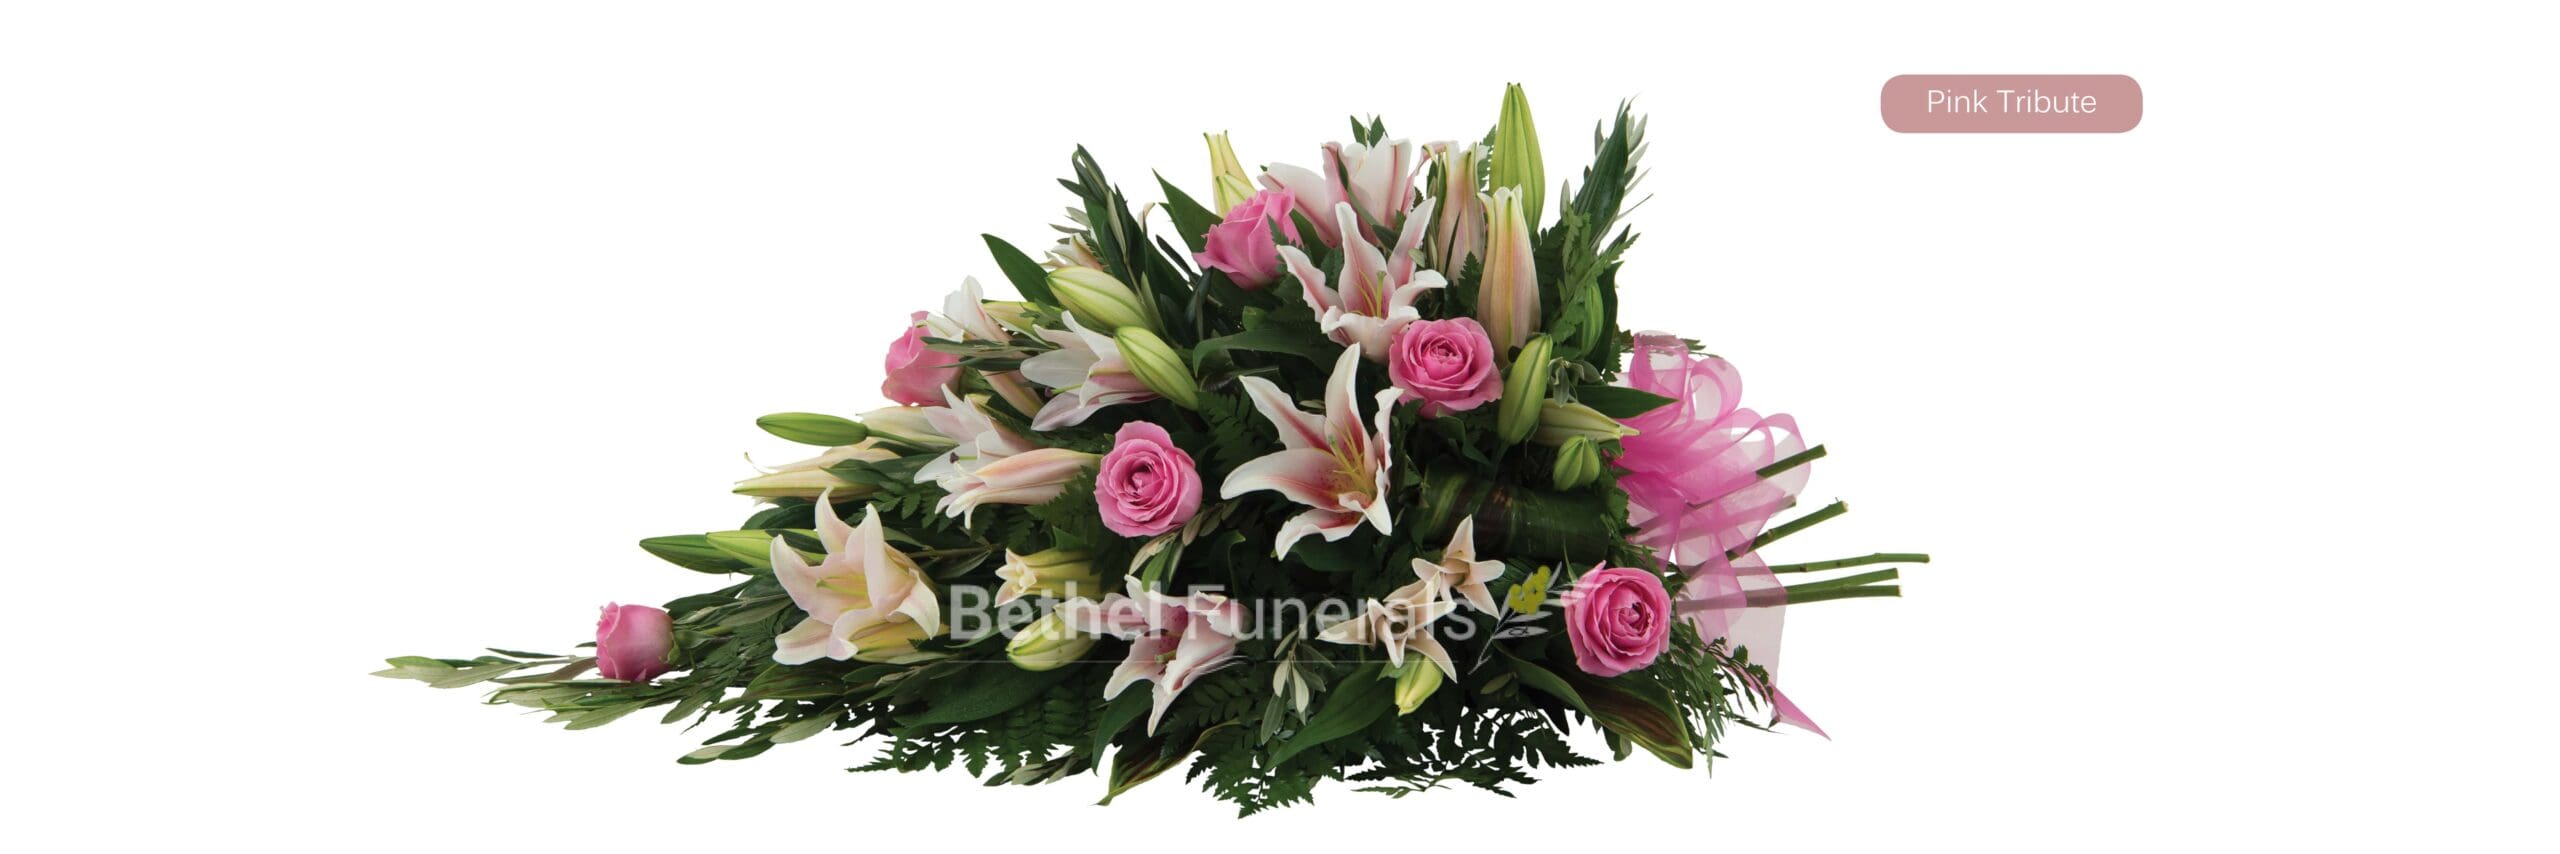 pink tribute funeral flowers